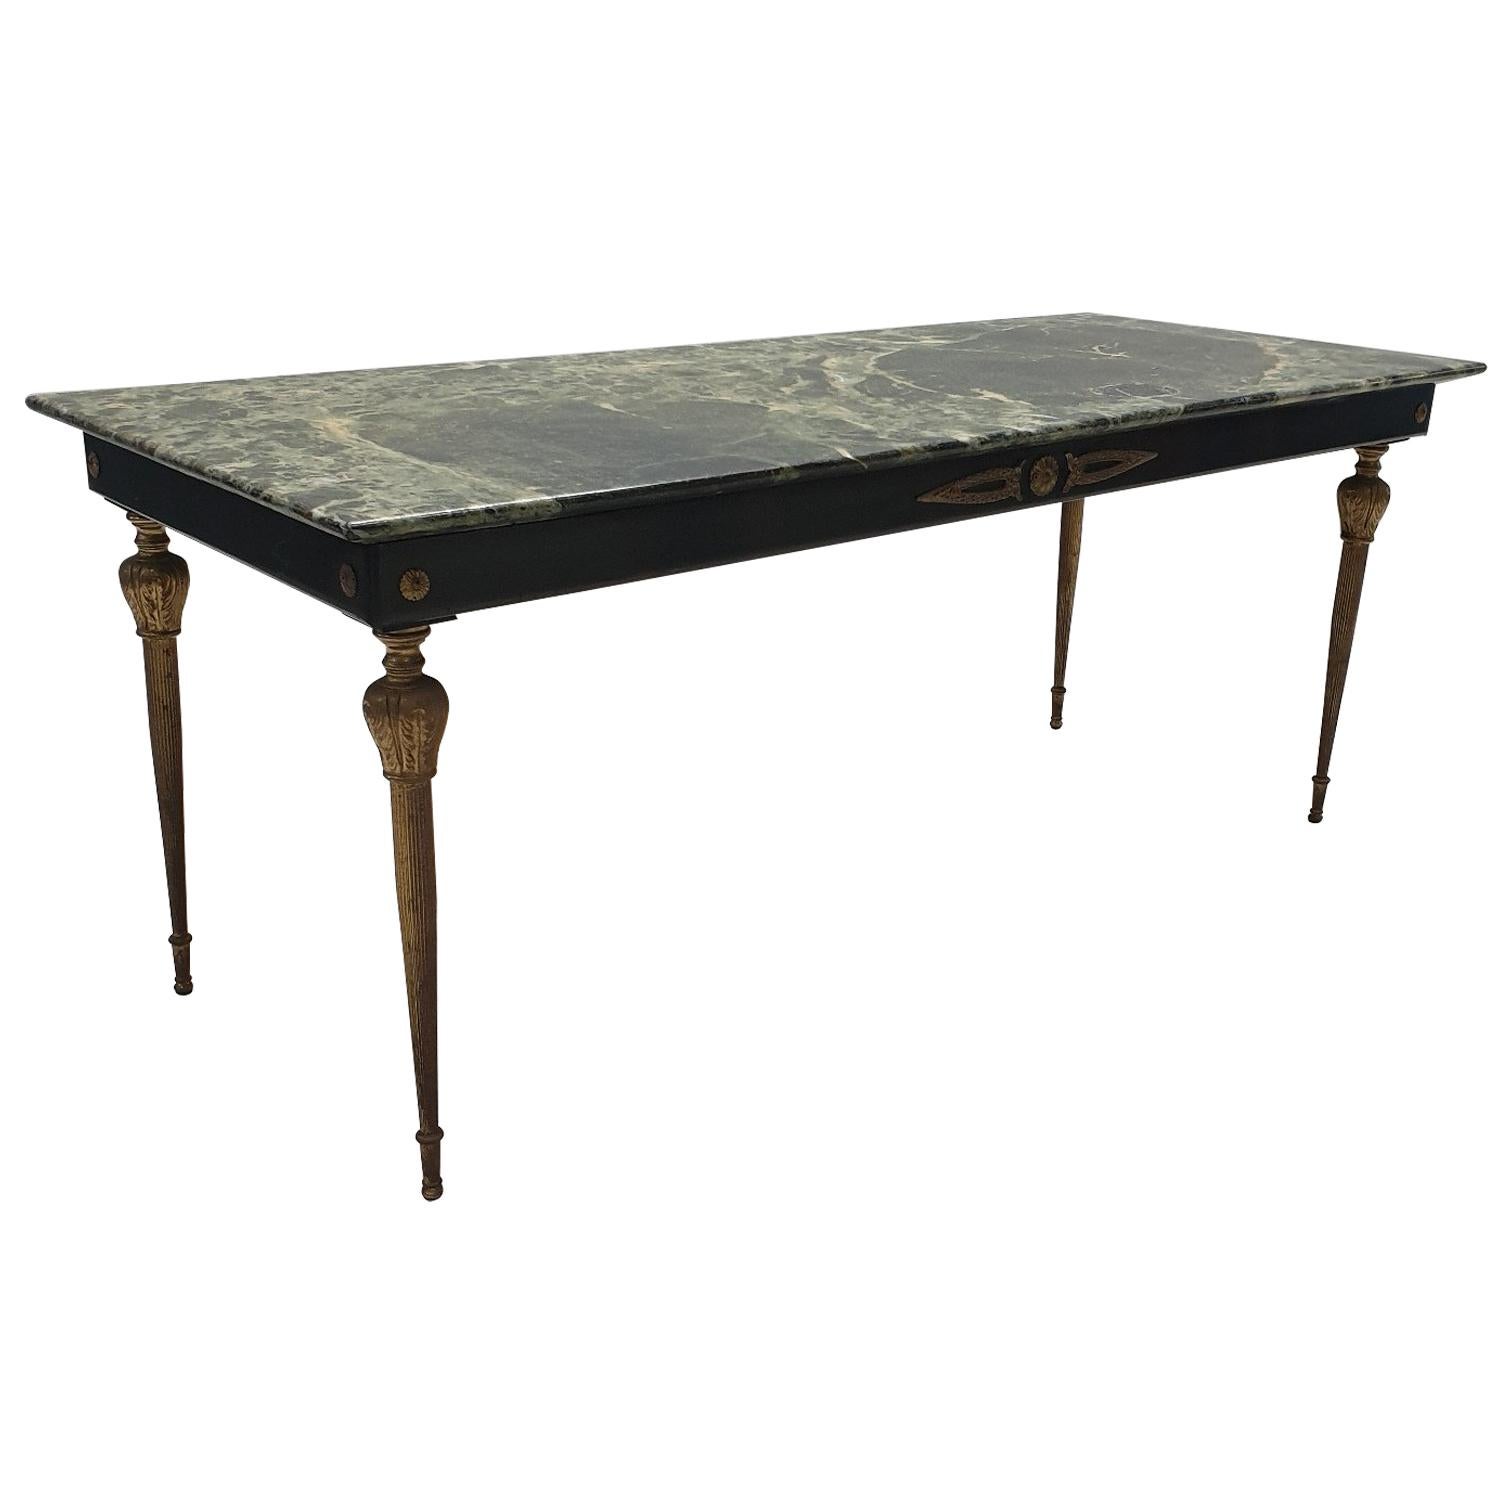 Vintage Brass Coffee Table with a Green Marble Top, 1950s For Sale